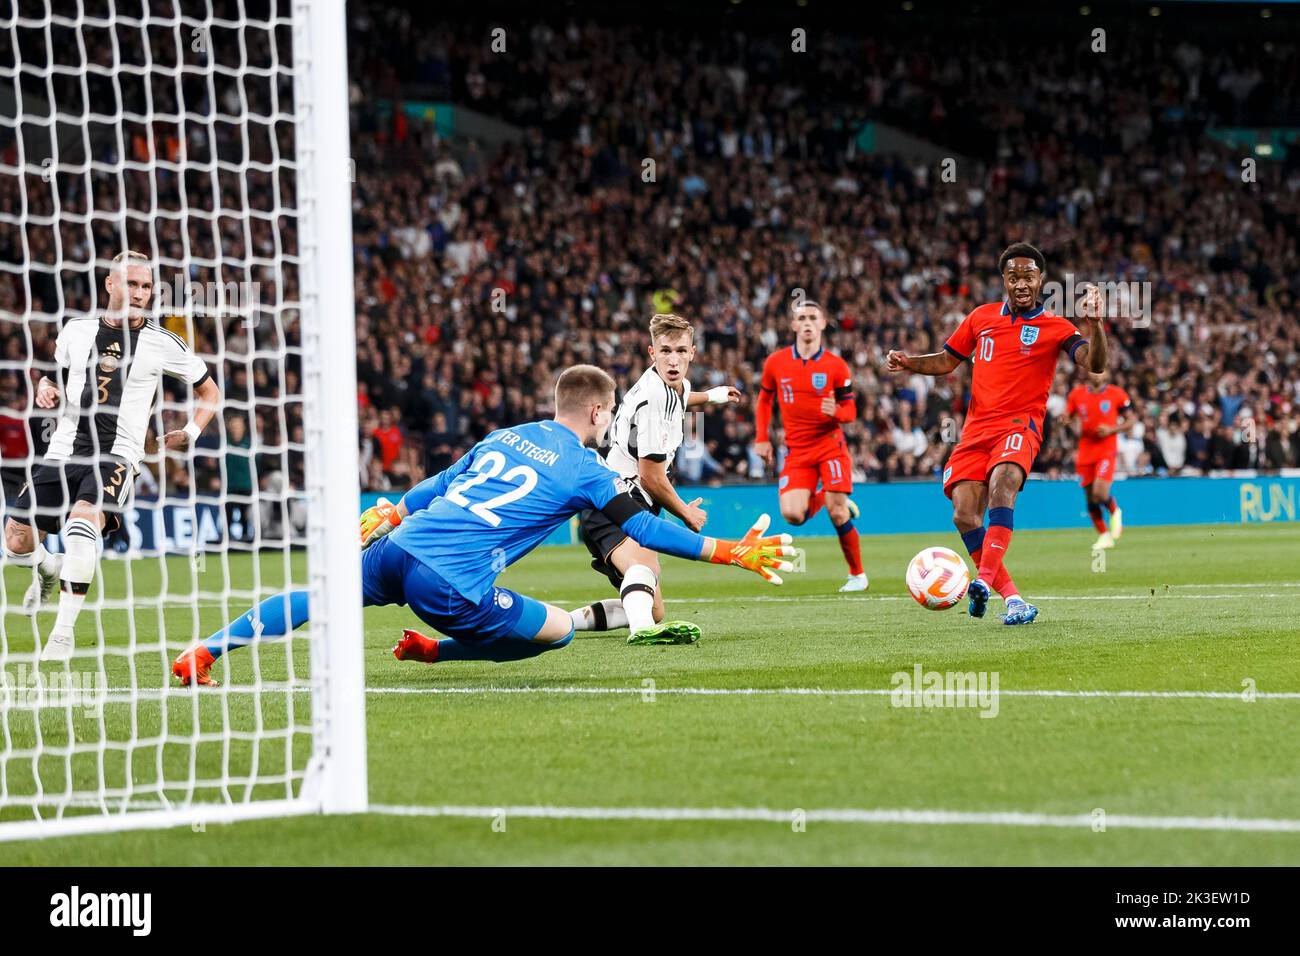 London, UK. 26th Sep, 2022. Marc-Andre ter Stegen of Germany saves from Raheem Sterling of England during the UEFA Nations League Group C match between England and Germany at Wembley Stadium on September 26th 2022 in London, England. (Photo by Daniel Chesterton/phcimages.com) Credit: PHC Images/Alamy Live News Stock Photo